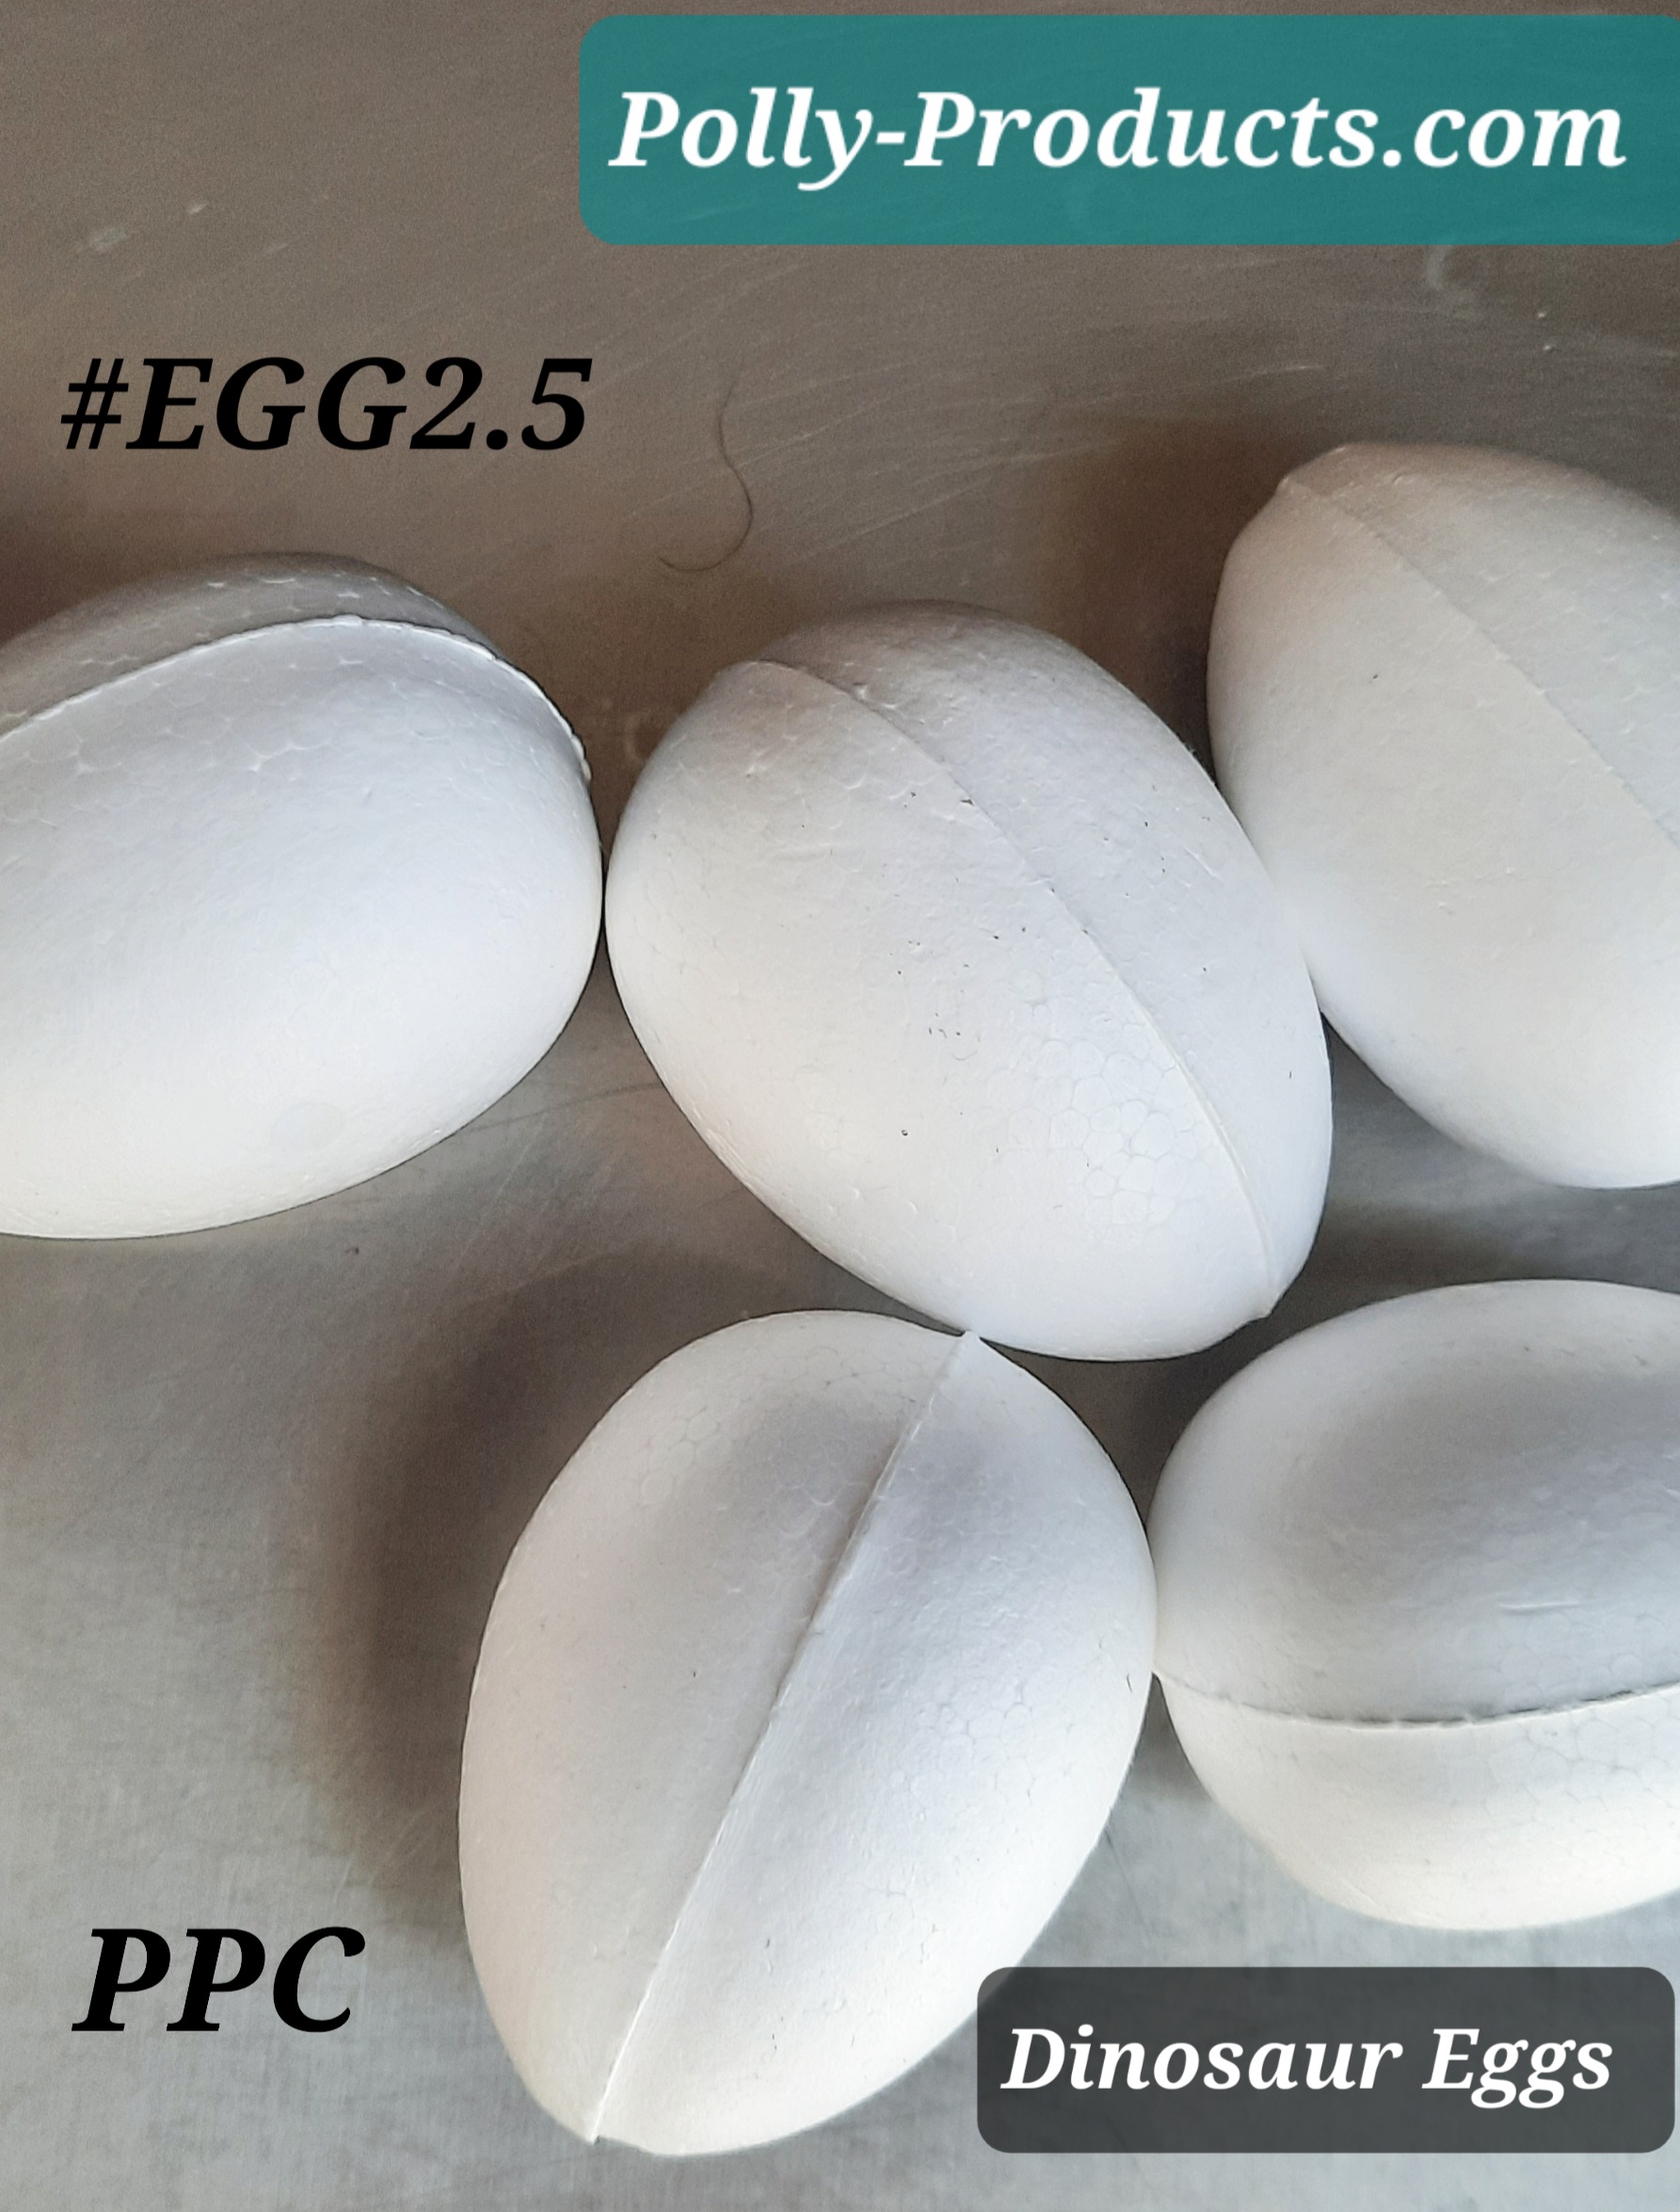 POLLY PRODUCTS COMPANY #EGG2.5 DINOSAUR EGGS AND POLLY-CRAFTS TM EGGS. PAINTABLE MADE IN THE USA 